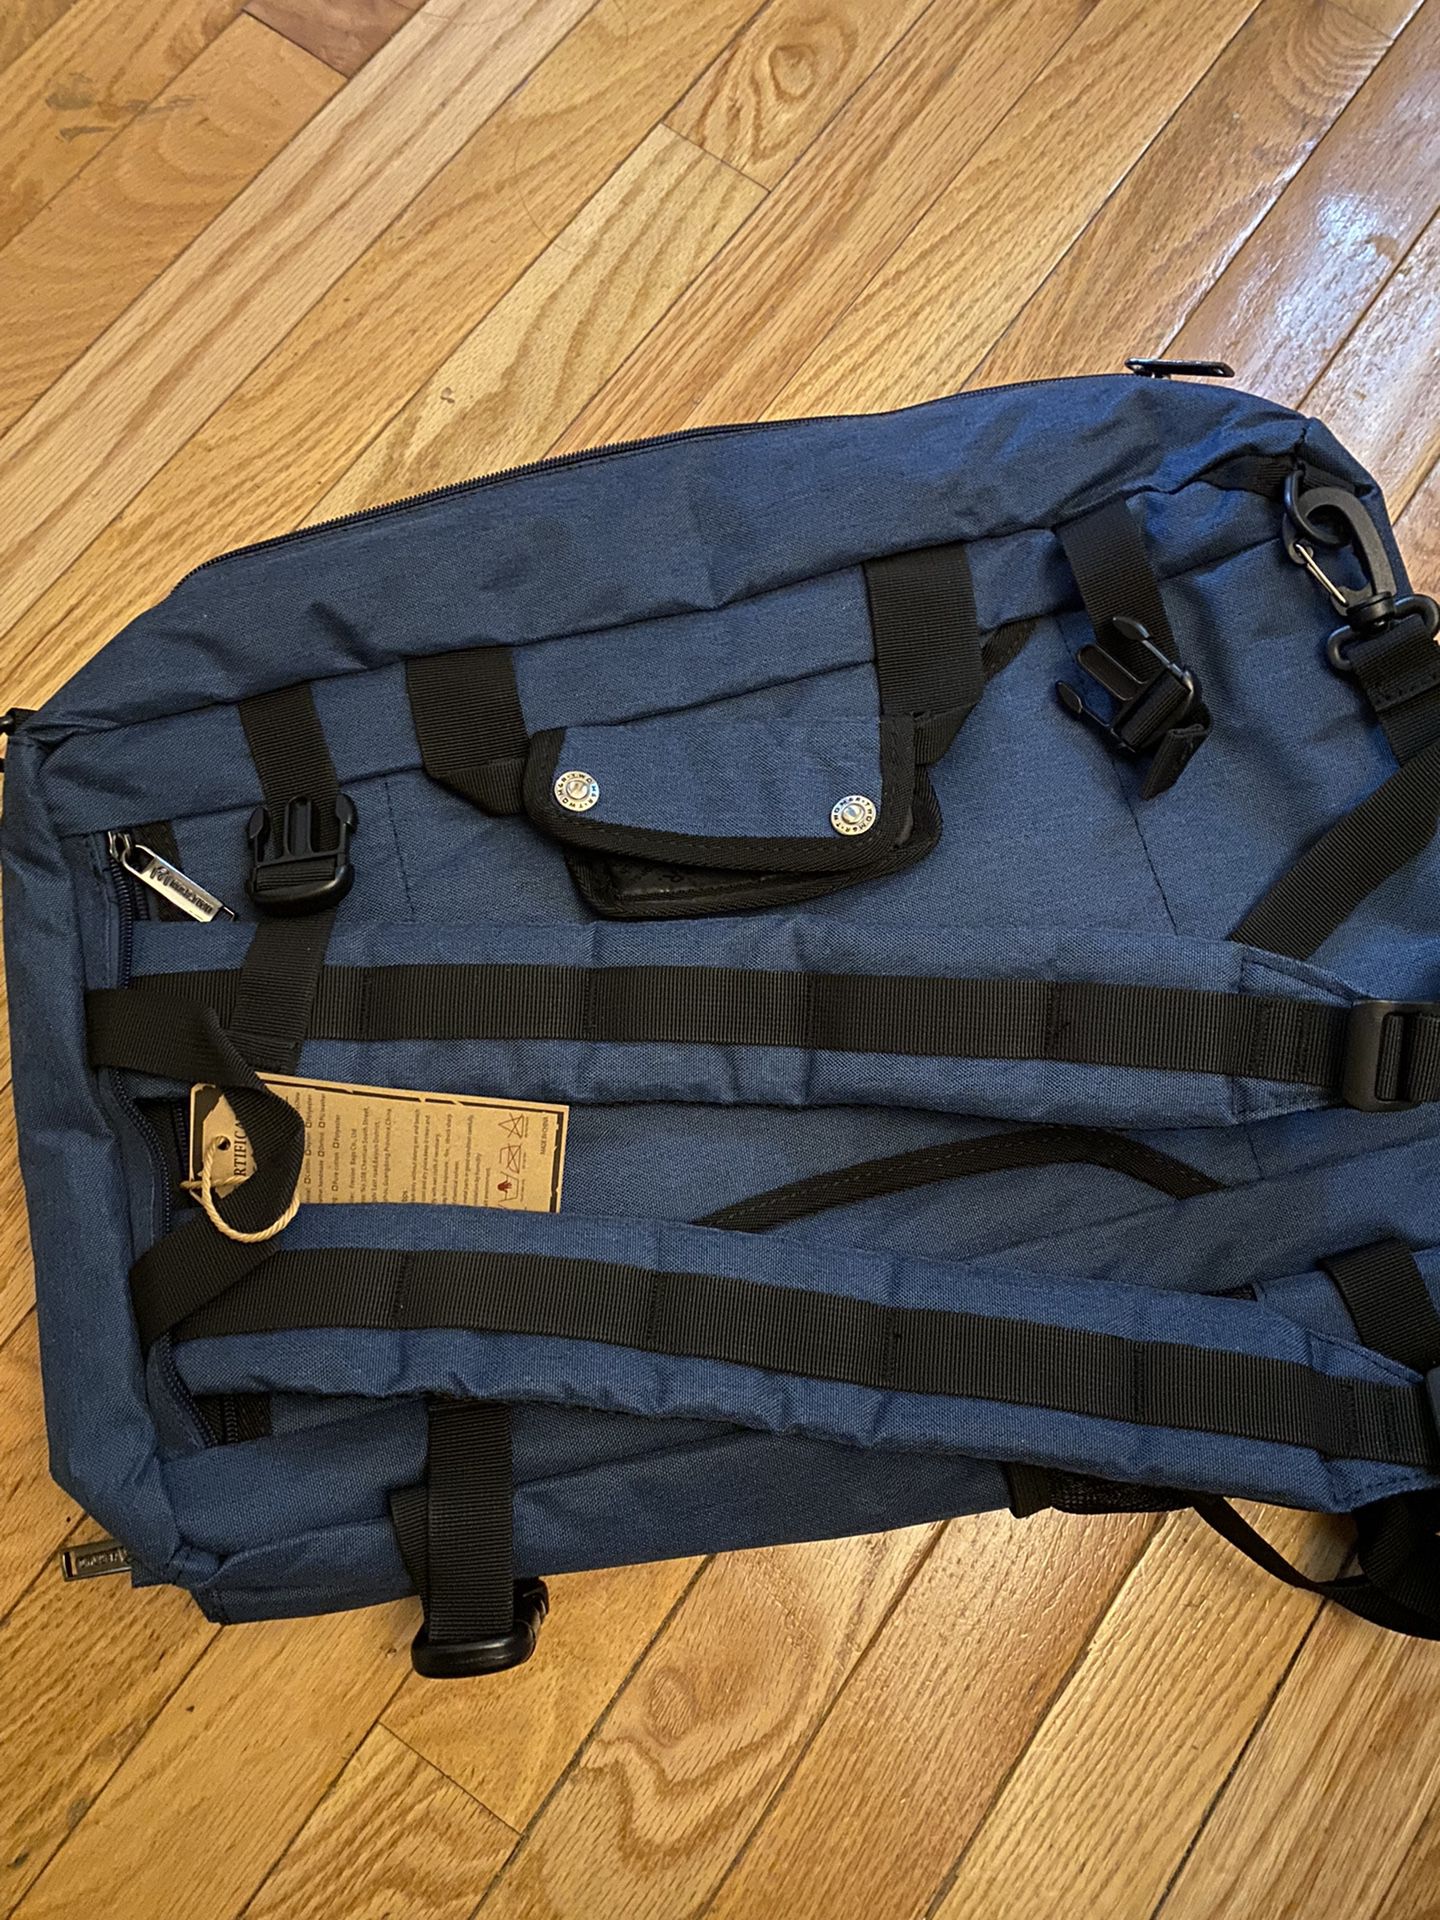 New Laptop Backpack 